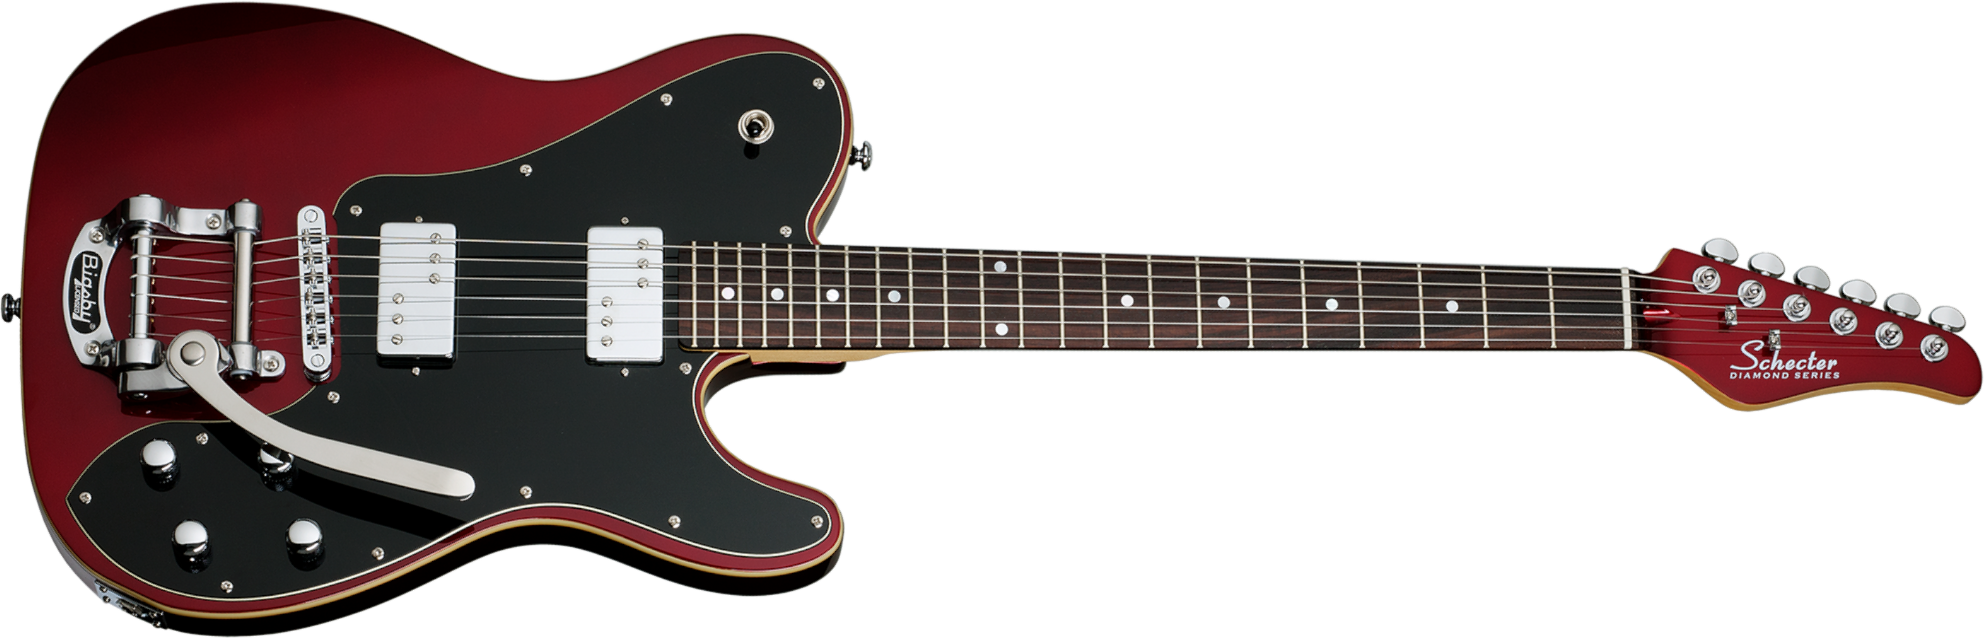 Schecter Pt Fastback Ii B Bigsby 2h Trem Bigsby Rw - Metallic Red - Guitare Électrique Forme Tel - Main picture